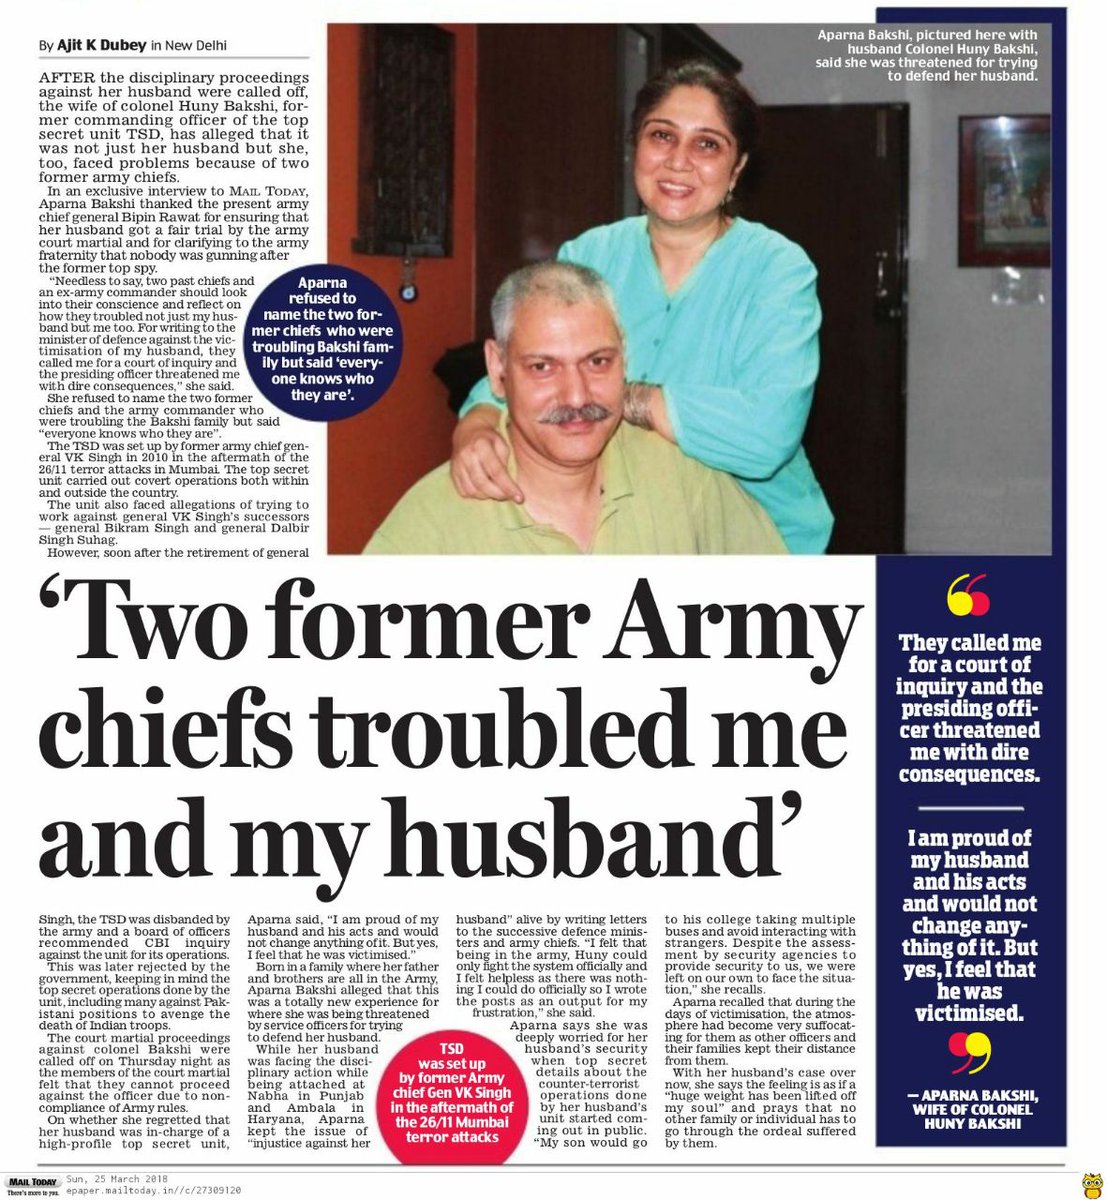 "Two former Army Chiefs troubled me and my husband": Mrs Aparna Bakshi - She fought the battles not many people will remember or want to talk about.Col Bakshi, who did things in defence of Union of India.Read and weep, o dear India.